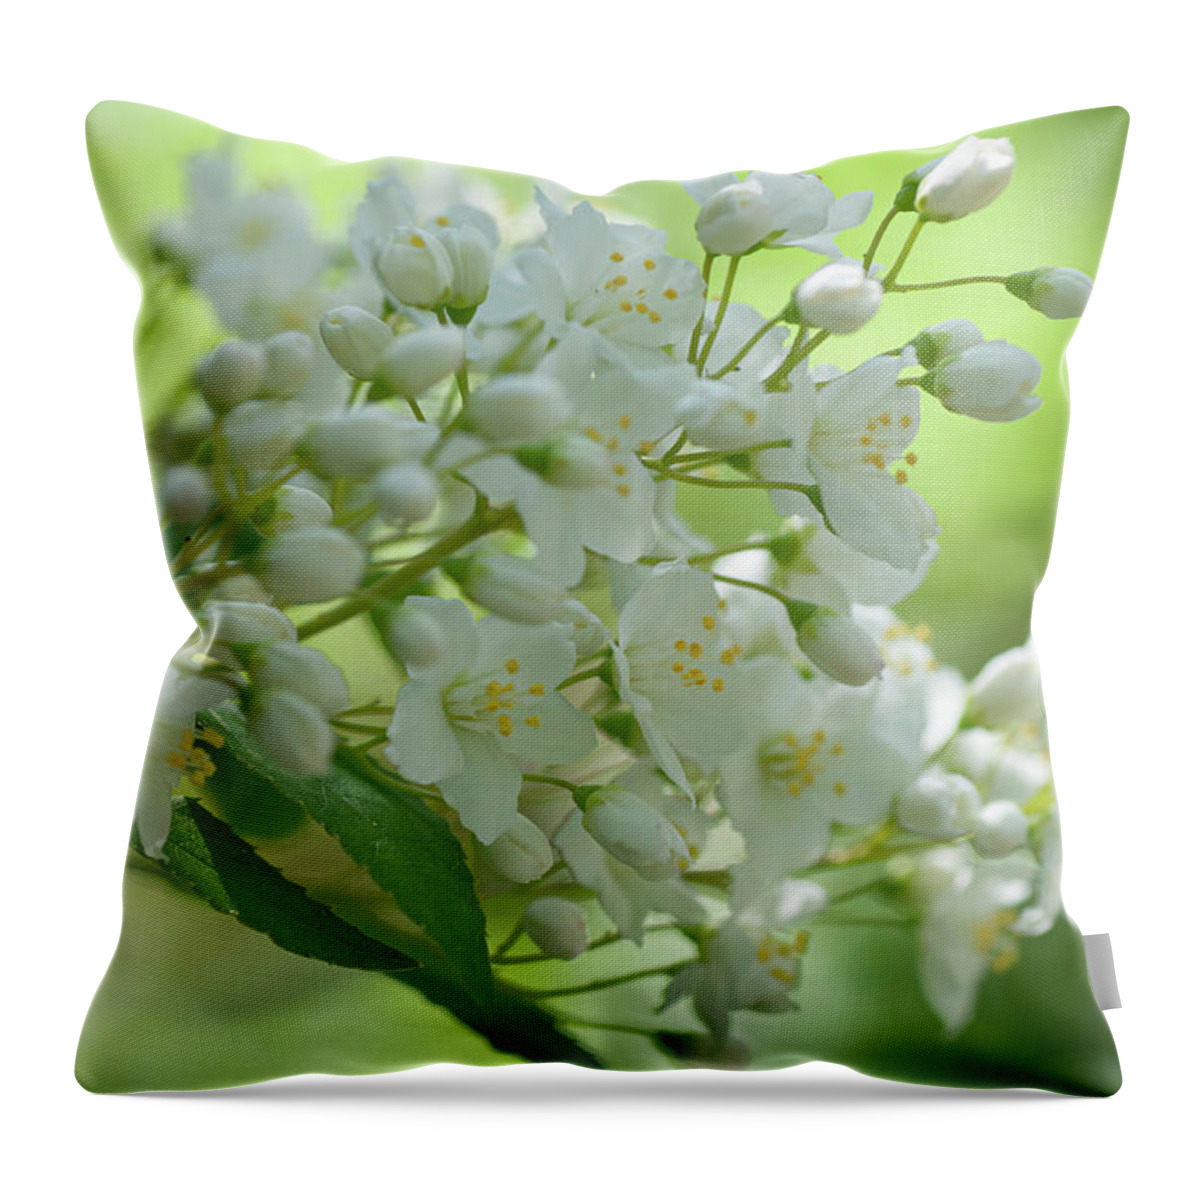  Throw Pillow featuring the photograph White Blooms Of Slender Deutzia 6 by Jenny Rainbow